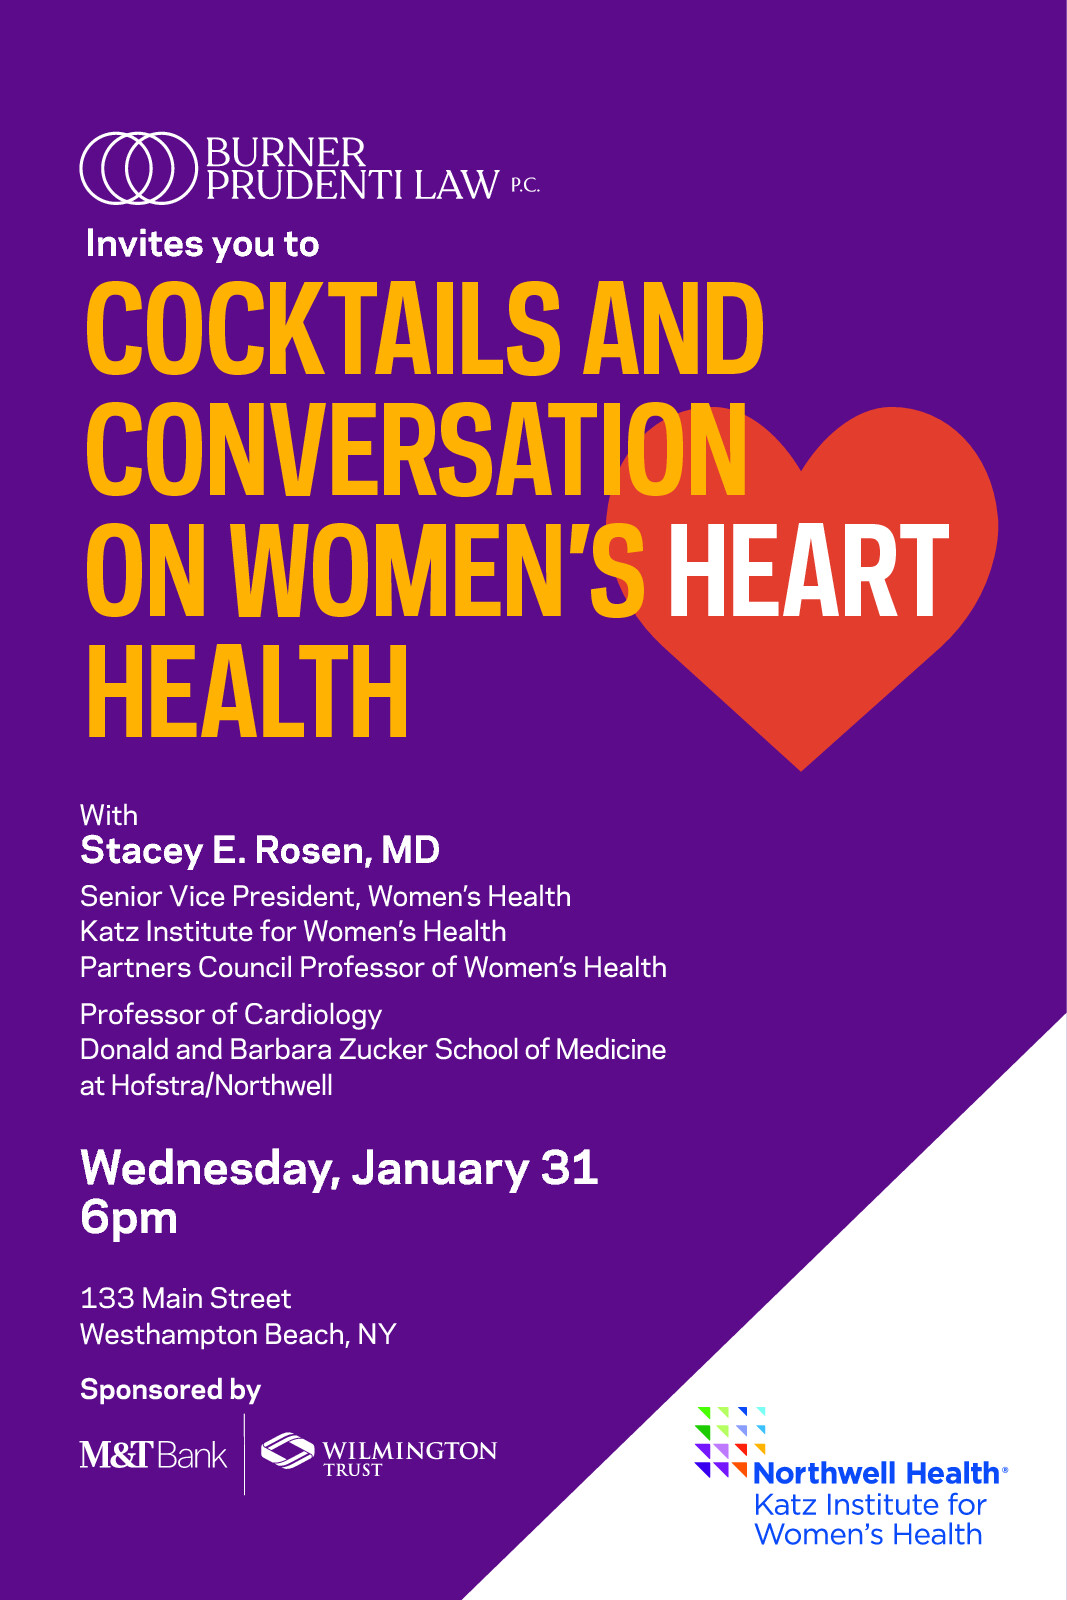 East End Cocktails & Conversations on Women's Heart Health